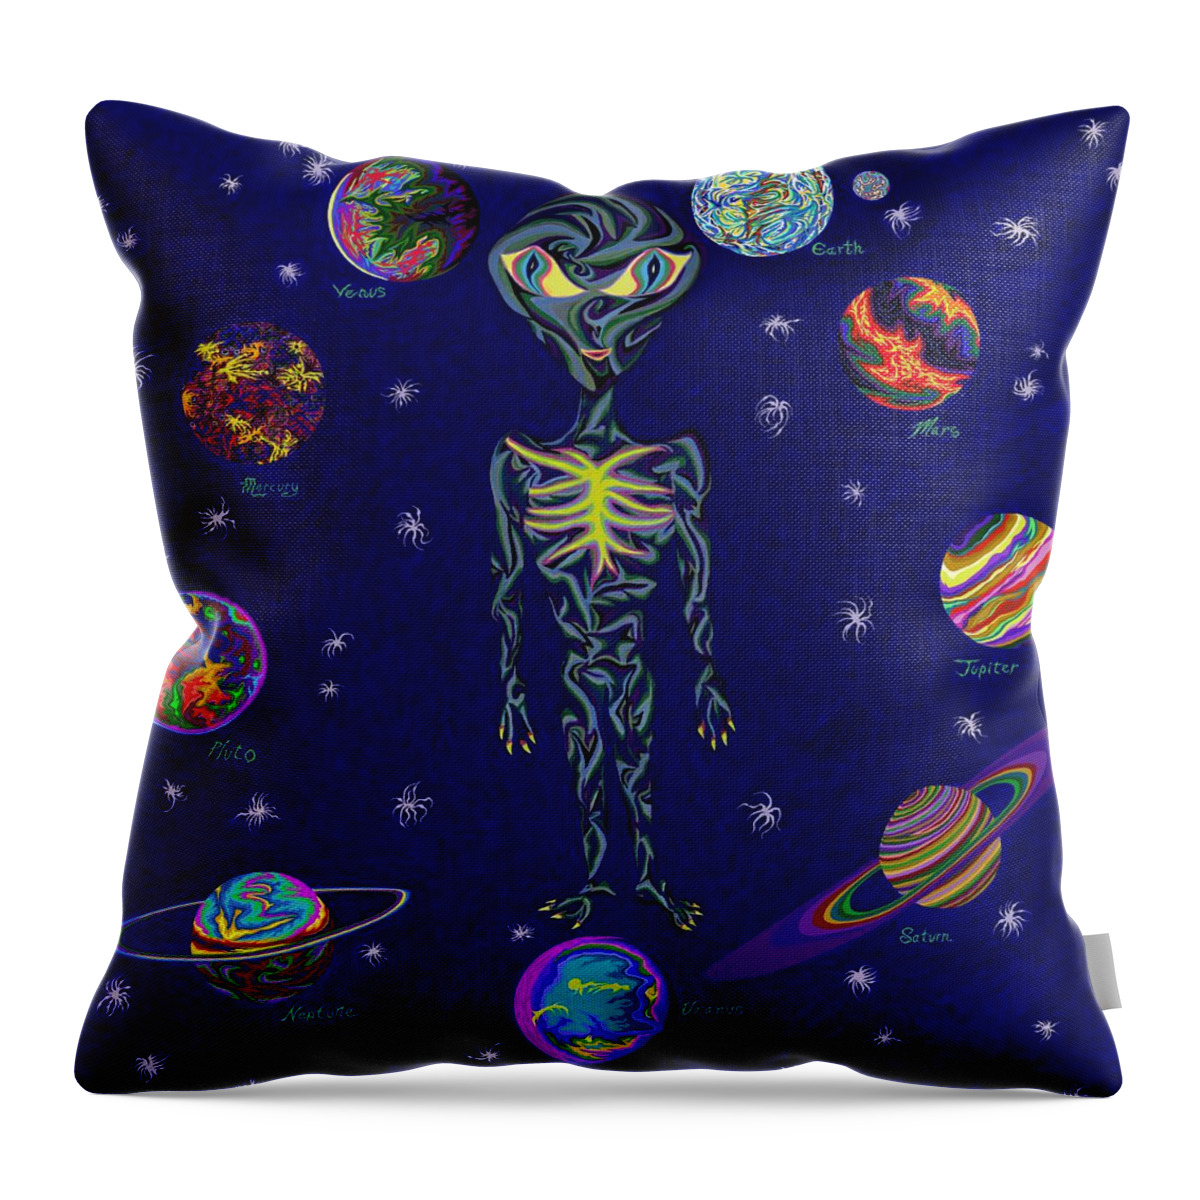 Zeta Reticulan Throw Pillow featuring the painting United Planets of The Zeta Reticulans by Robert SORENSEN